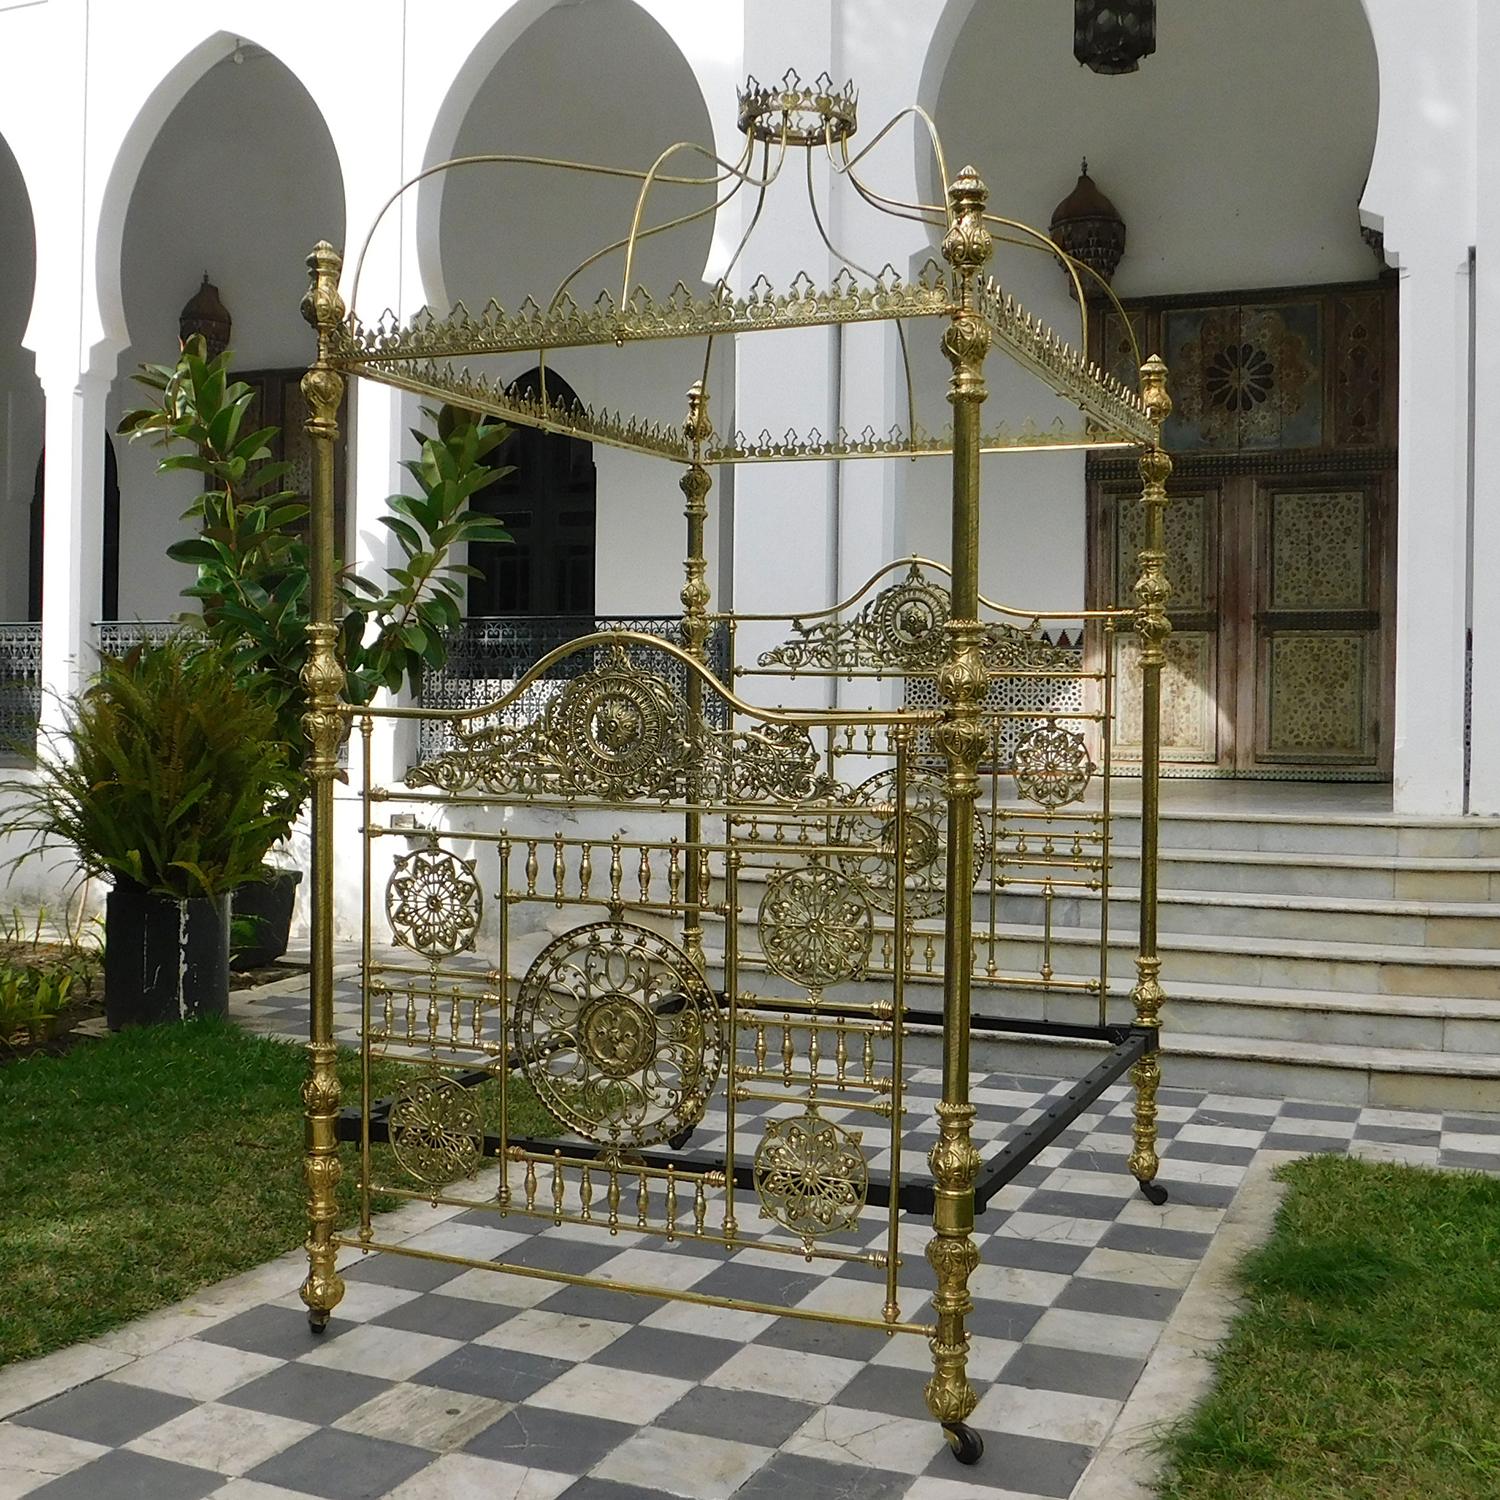 A majestic all brass four poster bed bedstead with crown and canopy. Detailed etched brass posts, displaying ornate brass fittings, support an impressive canopy, with decorative fretwork castings, surmounted by a brass crown. The two superbly